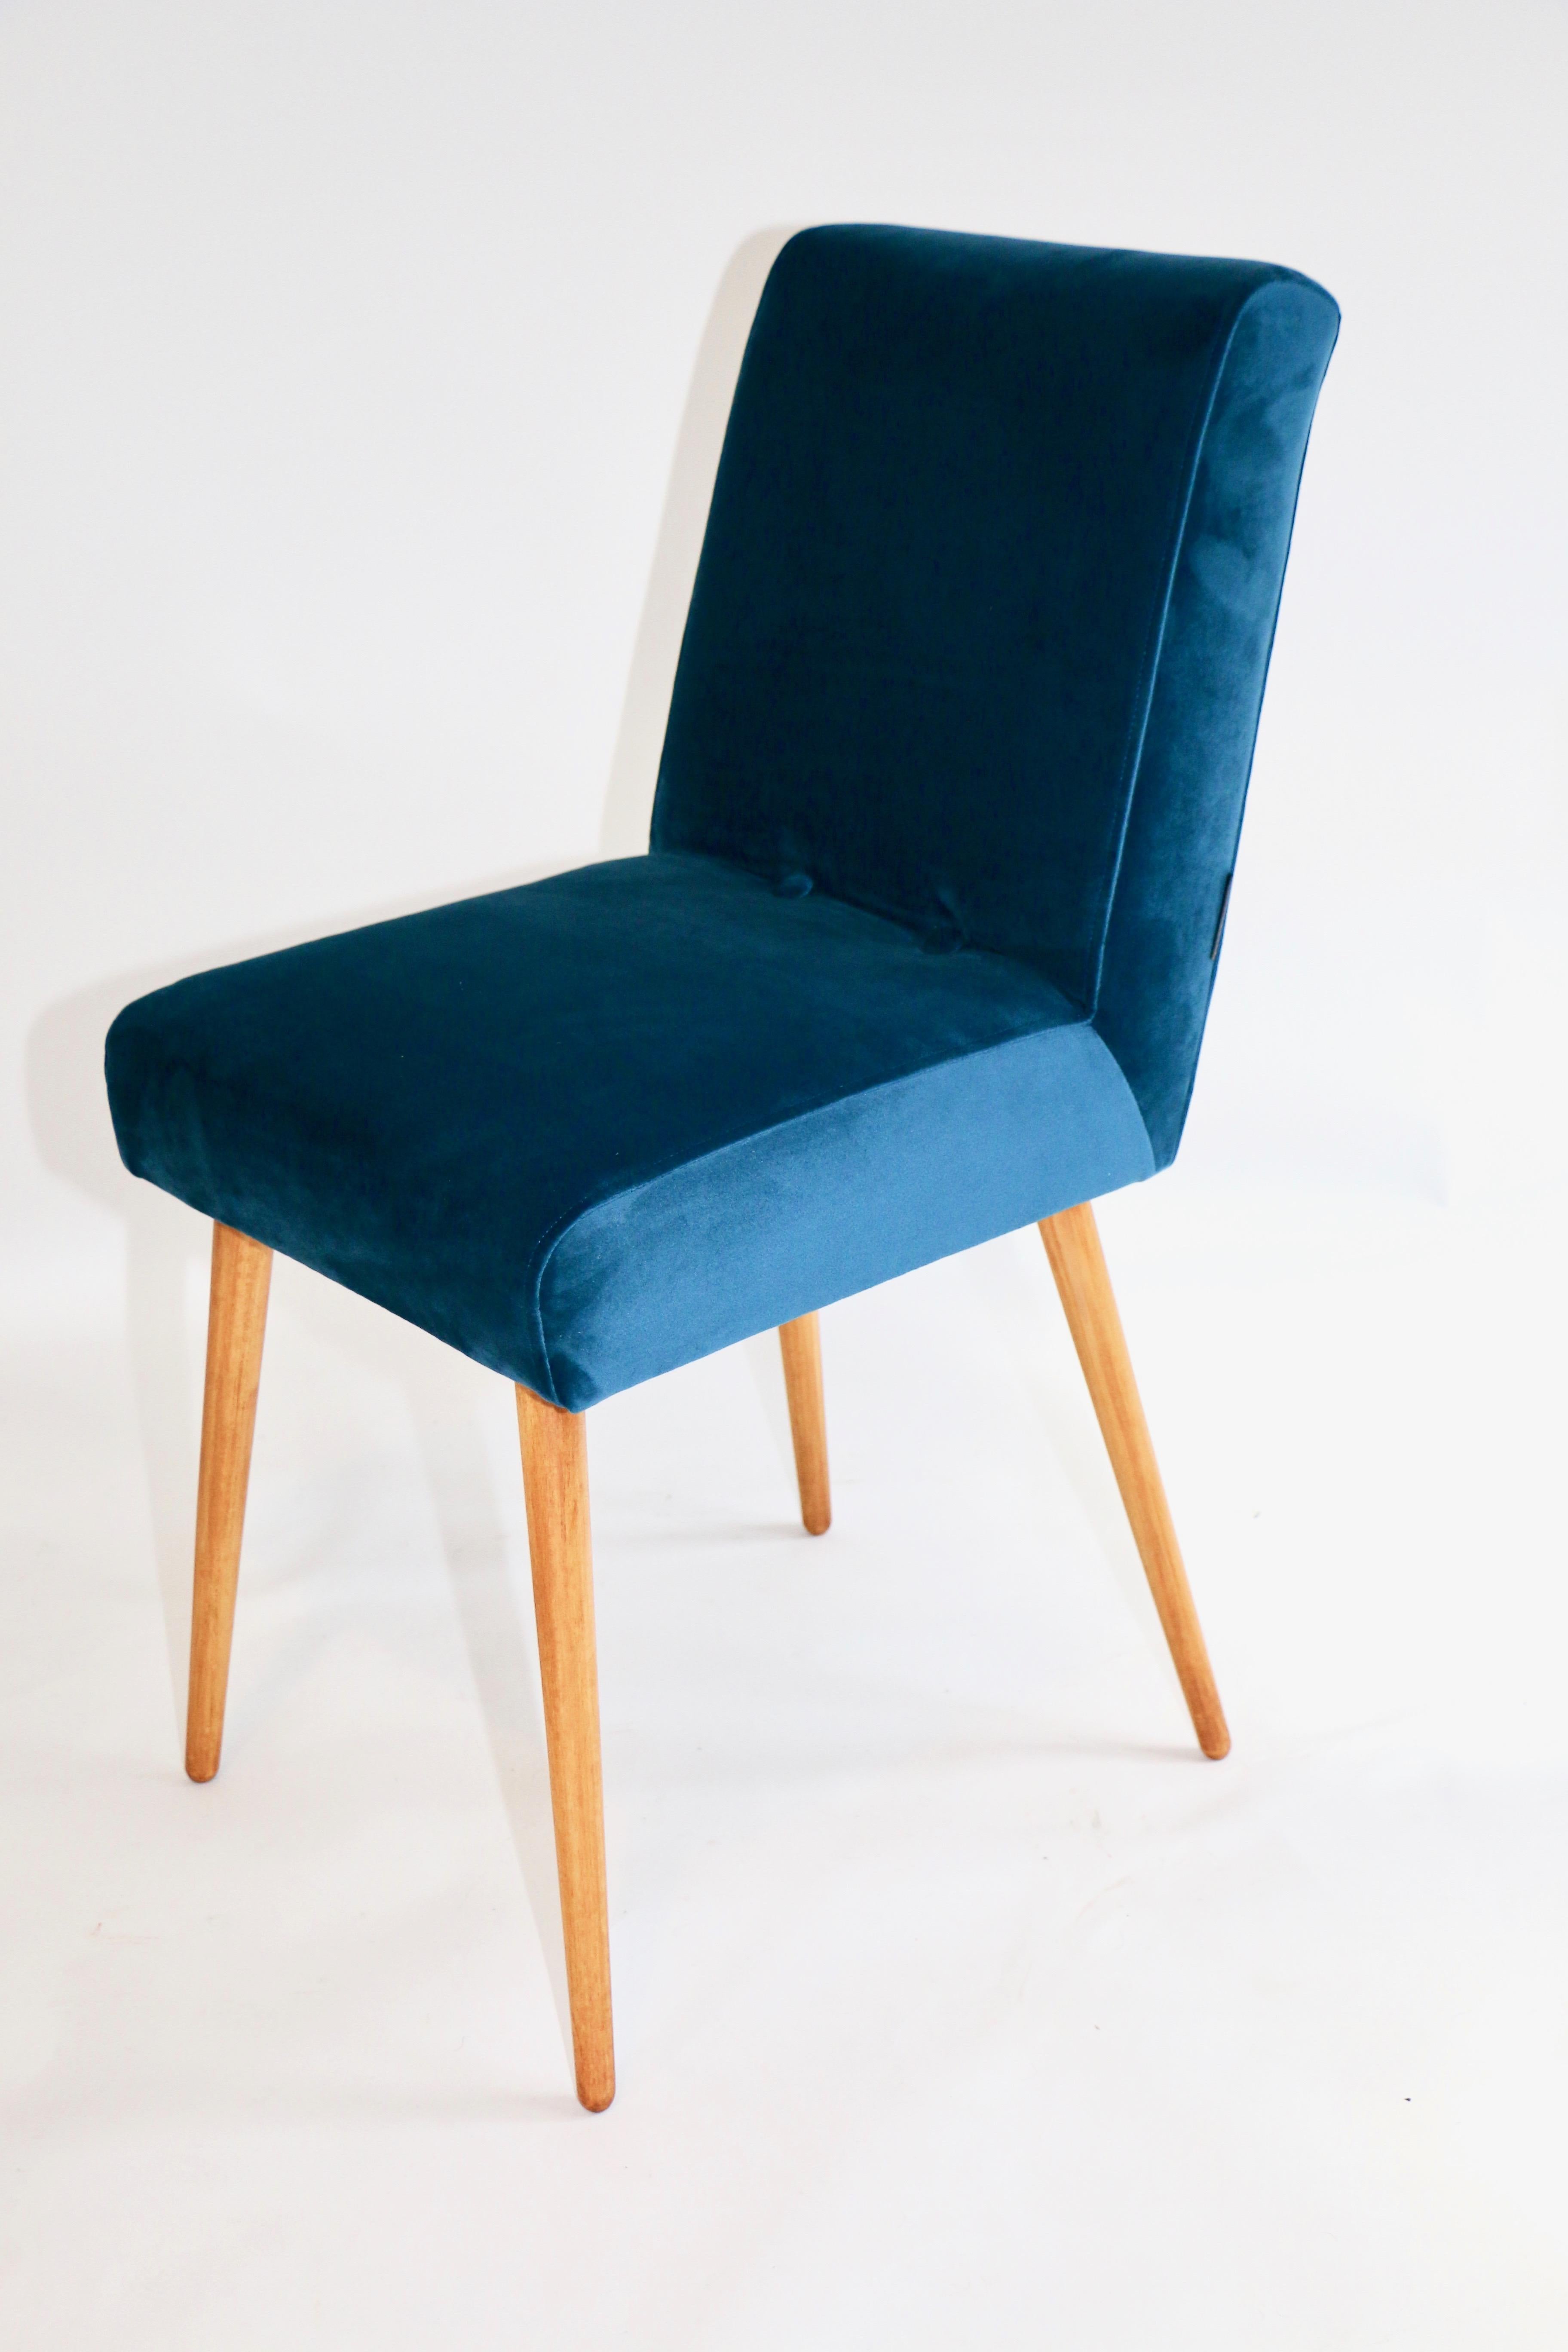 Set of Two Blue Marine Chairs in Velvet In Good Condition For Sale In Wroclaw, PL